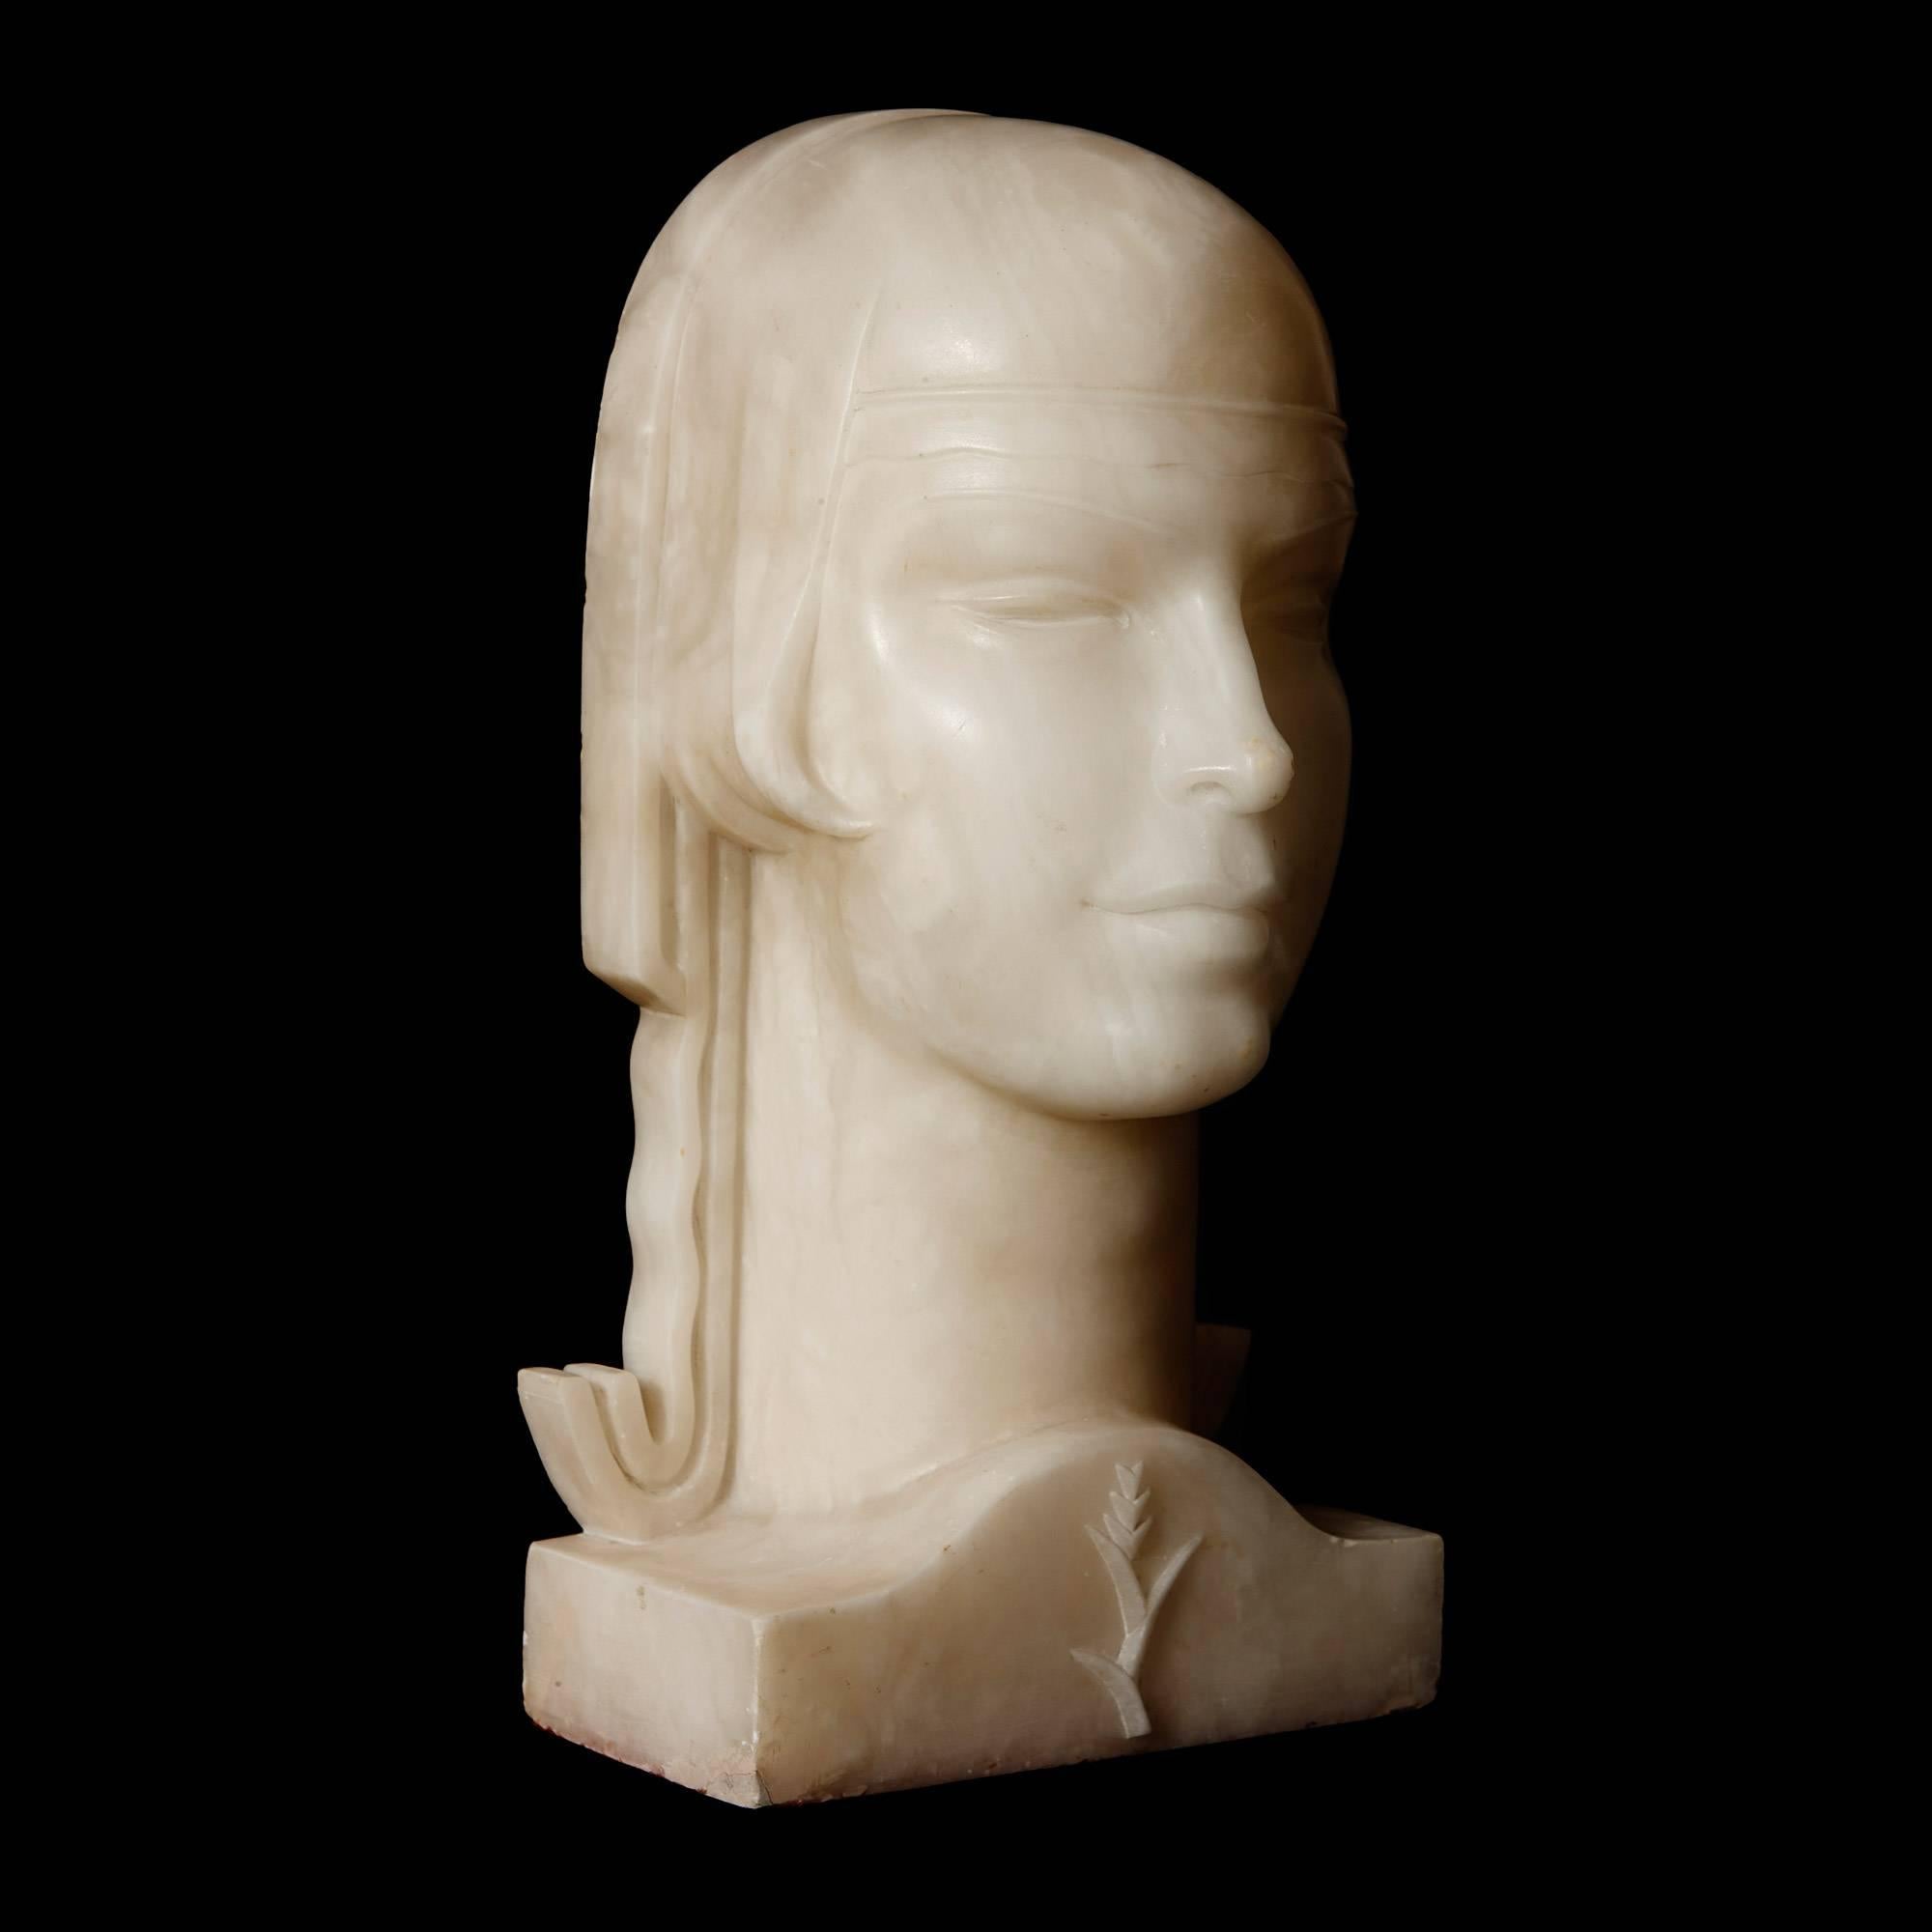 This impressive alabaster bust has been beautifully carved to represent an elegant lady's head and shoulders, set on a rectangular plinth. With harmonious proportions and straight lines, the sculpture is an excellent example of the refined Art Deco